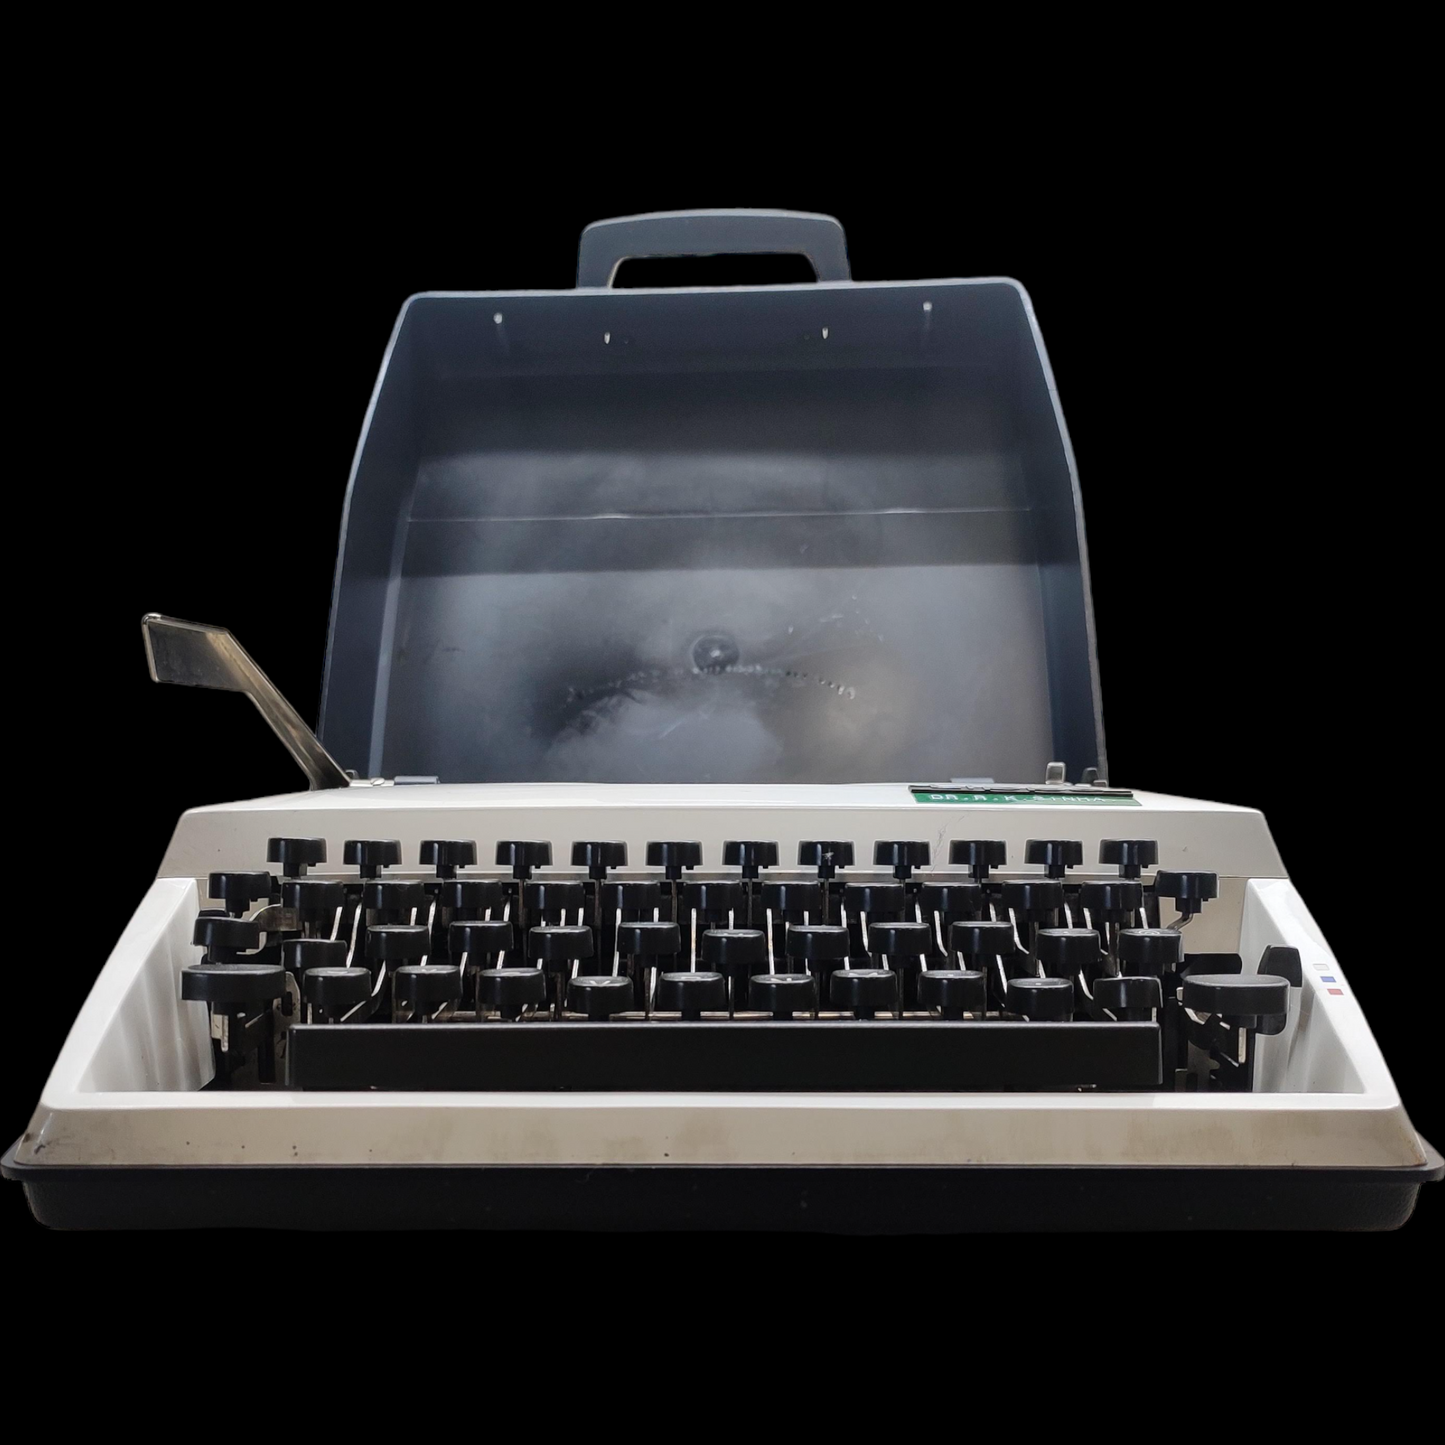 Image of Adler Tippa Typewriter. Available from universaltypewritercompany.in